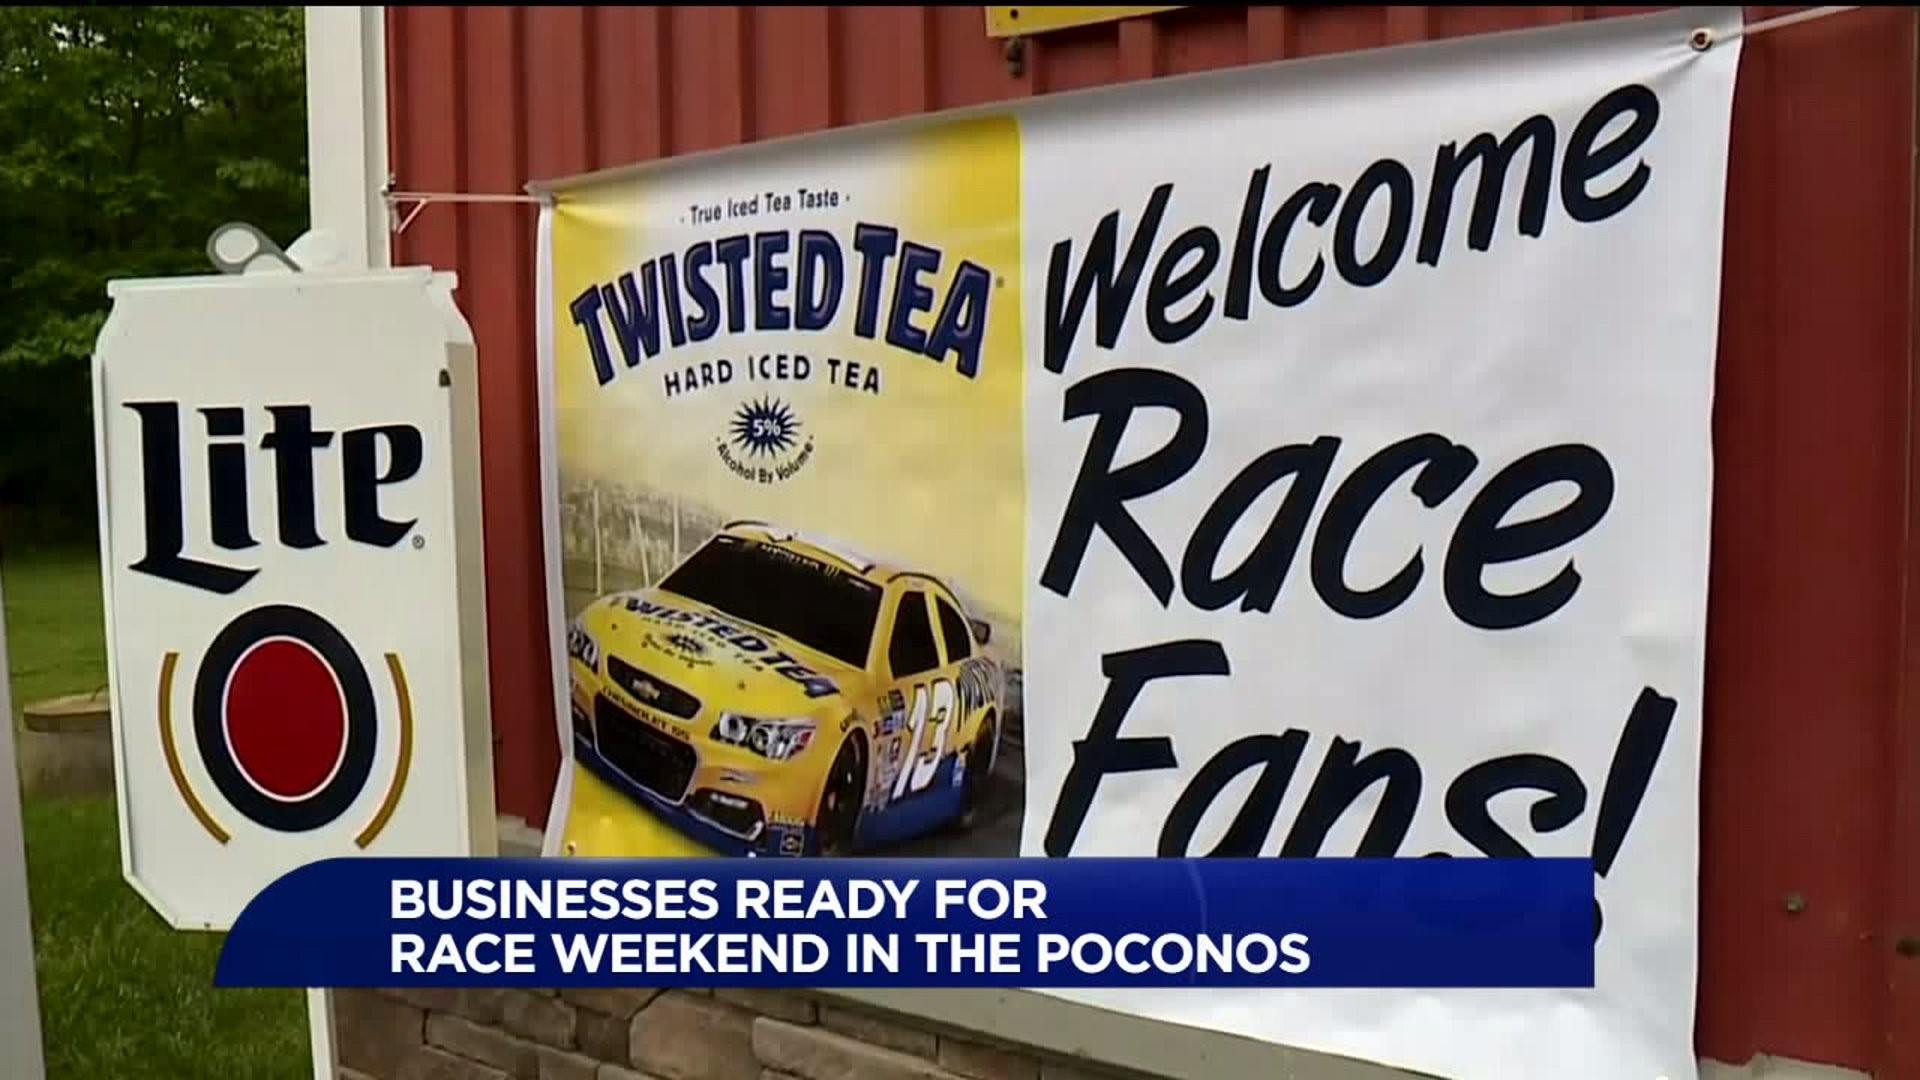 Businesses Ready for Race Weekend in the Poconos